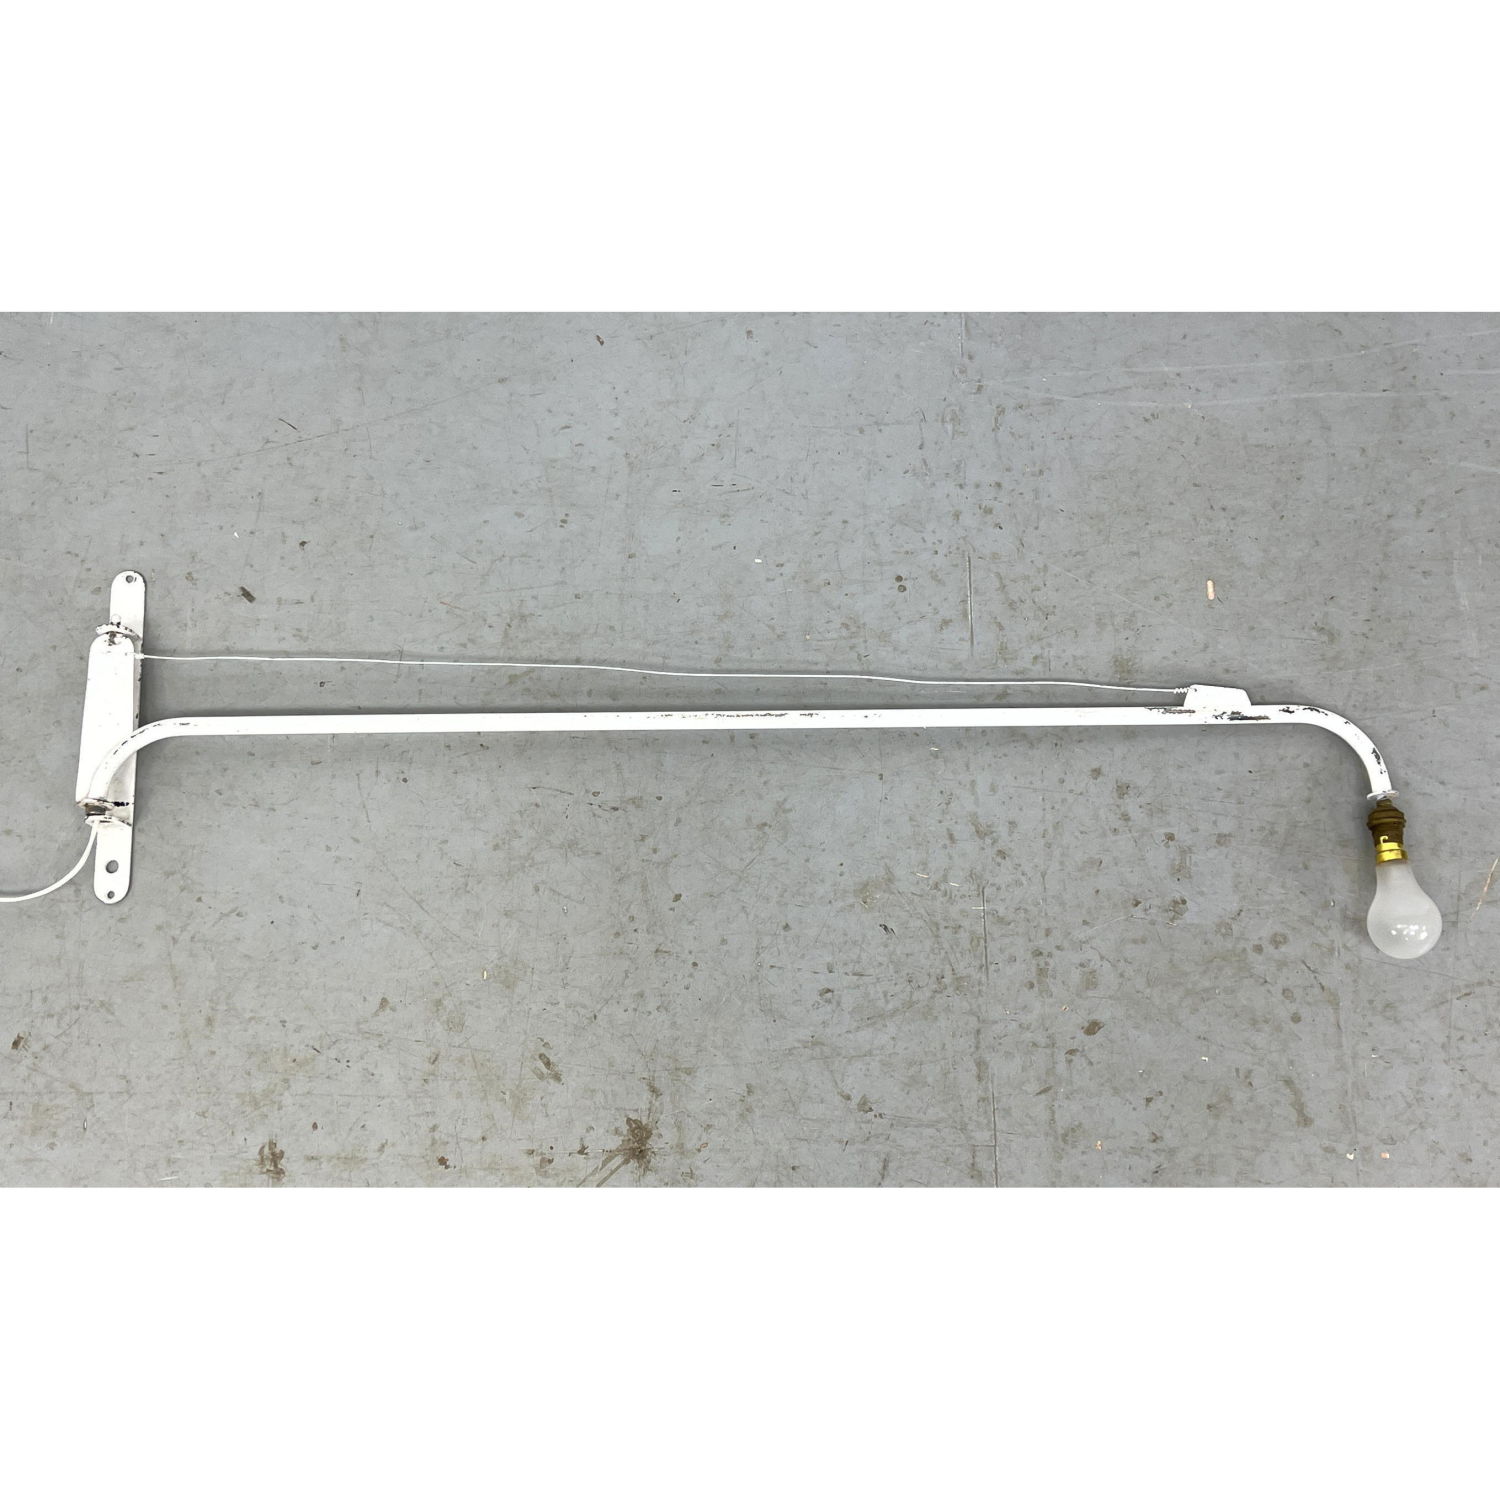 Jean Prouve Style Jib lamp with